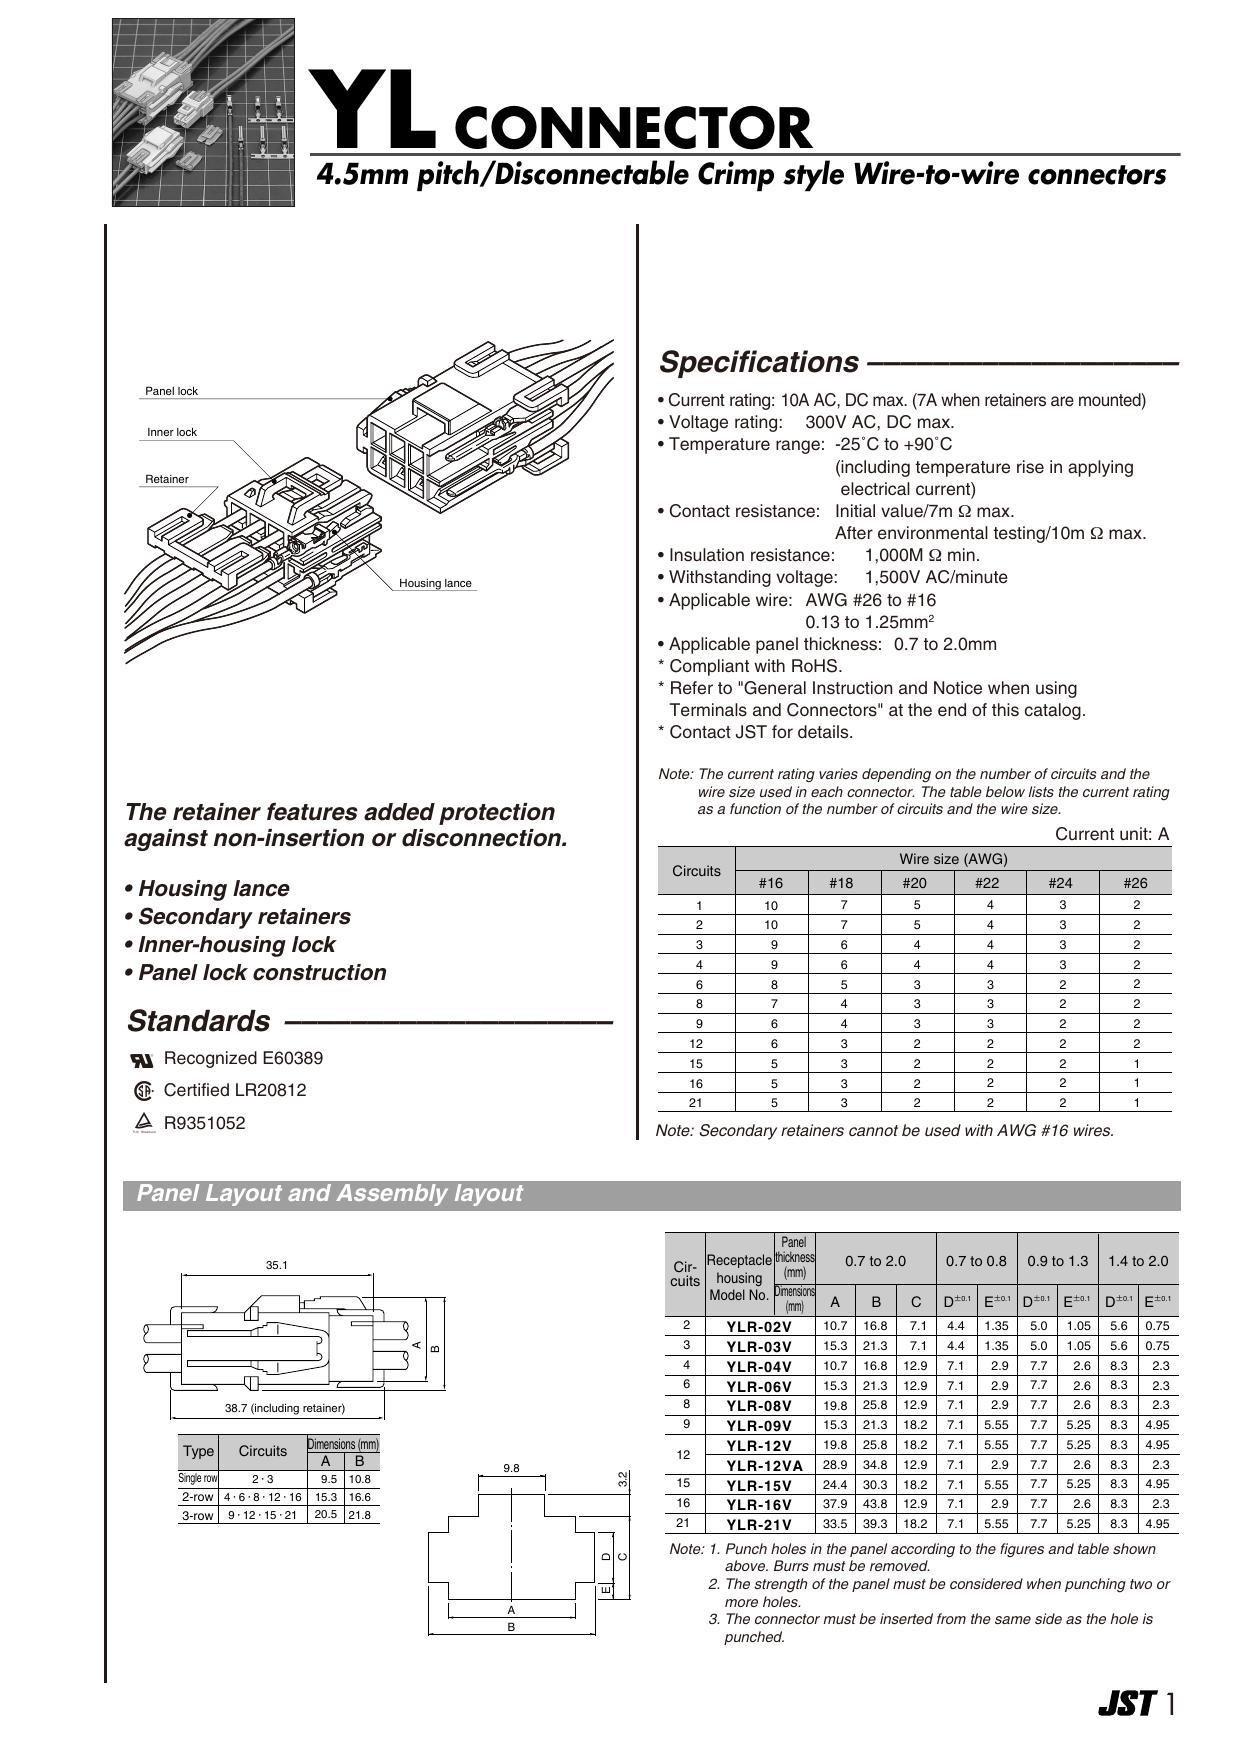 ylconnector-45mm-pitch-crimp-style-wire-to-wire-connectors-datasheet.pdf